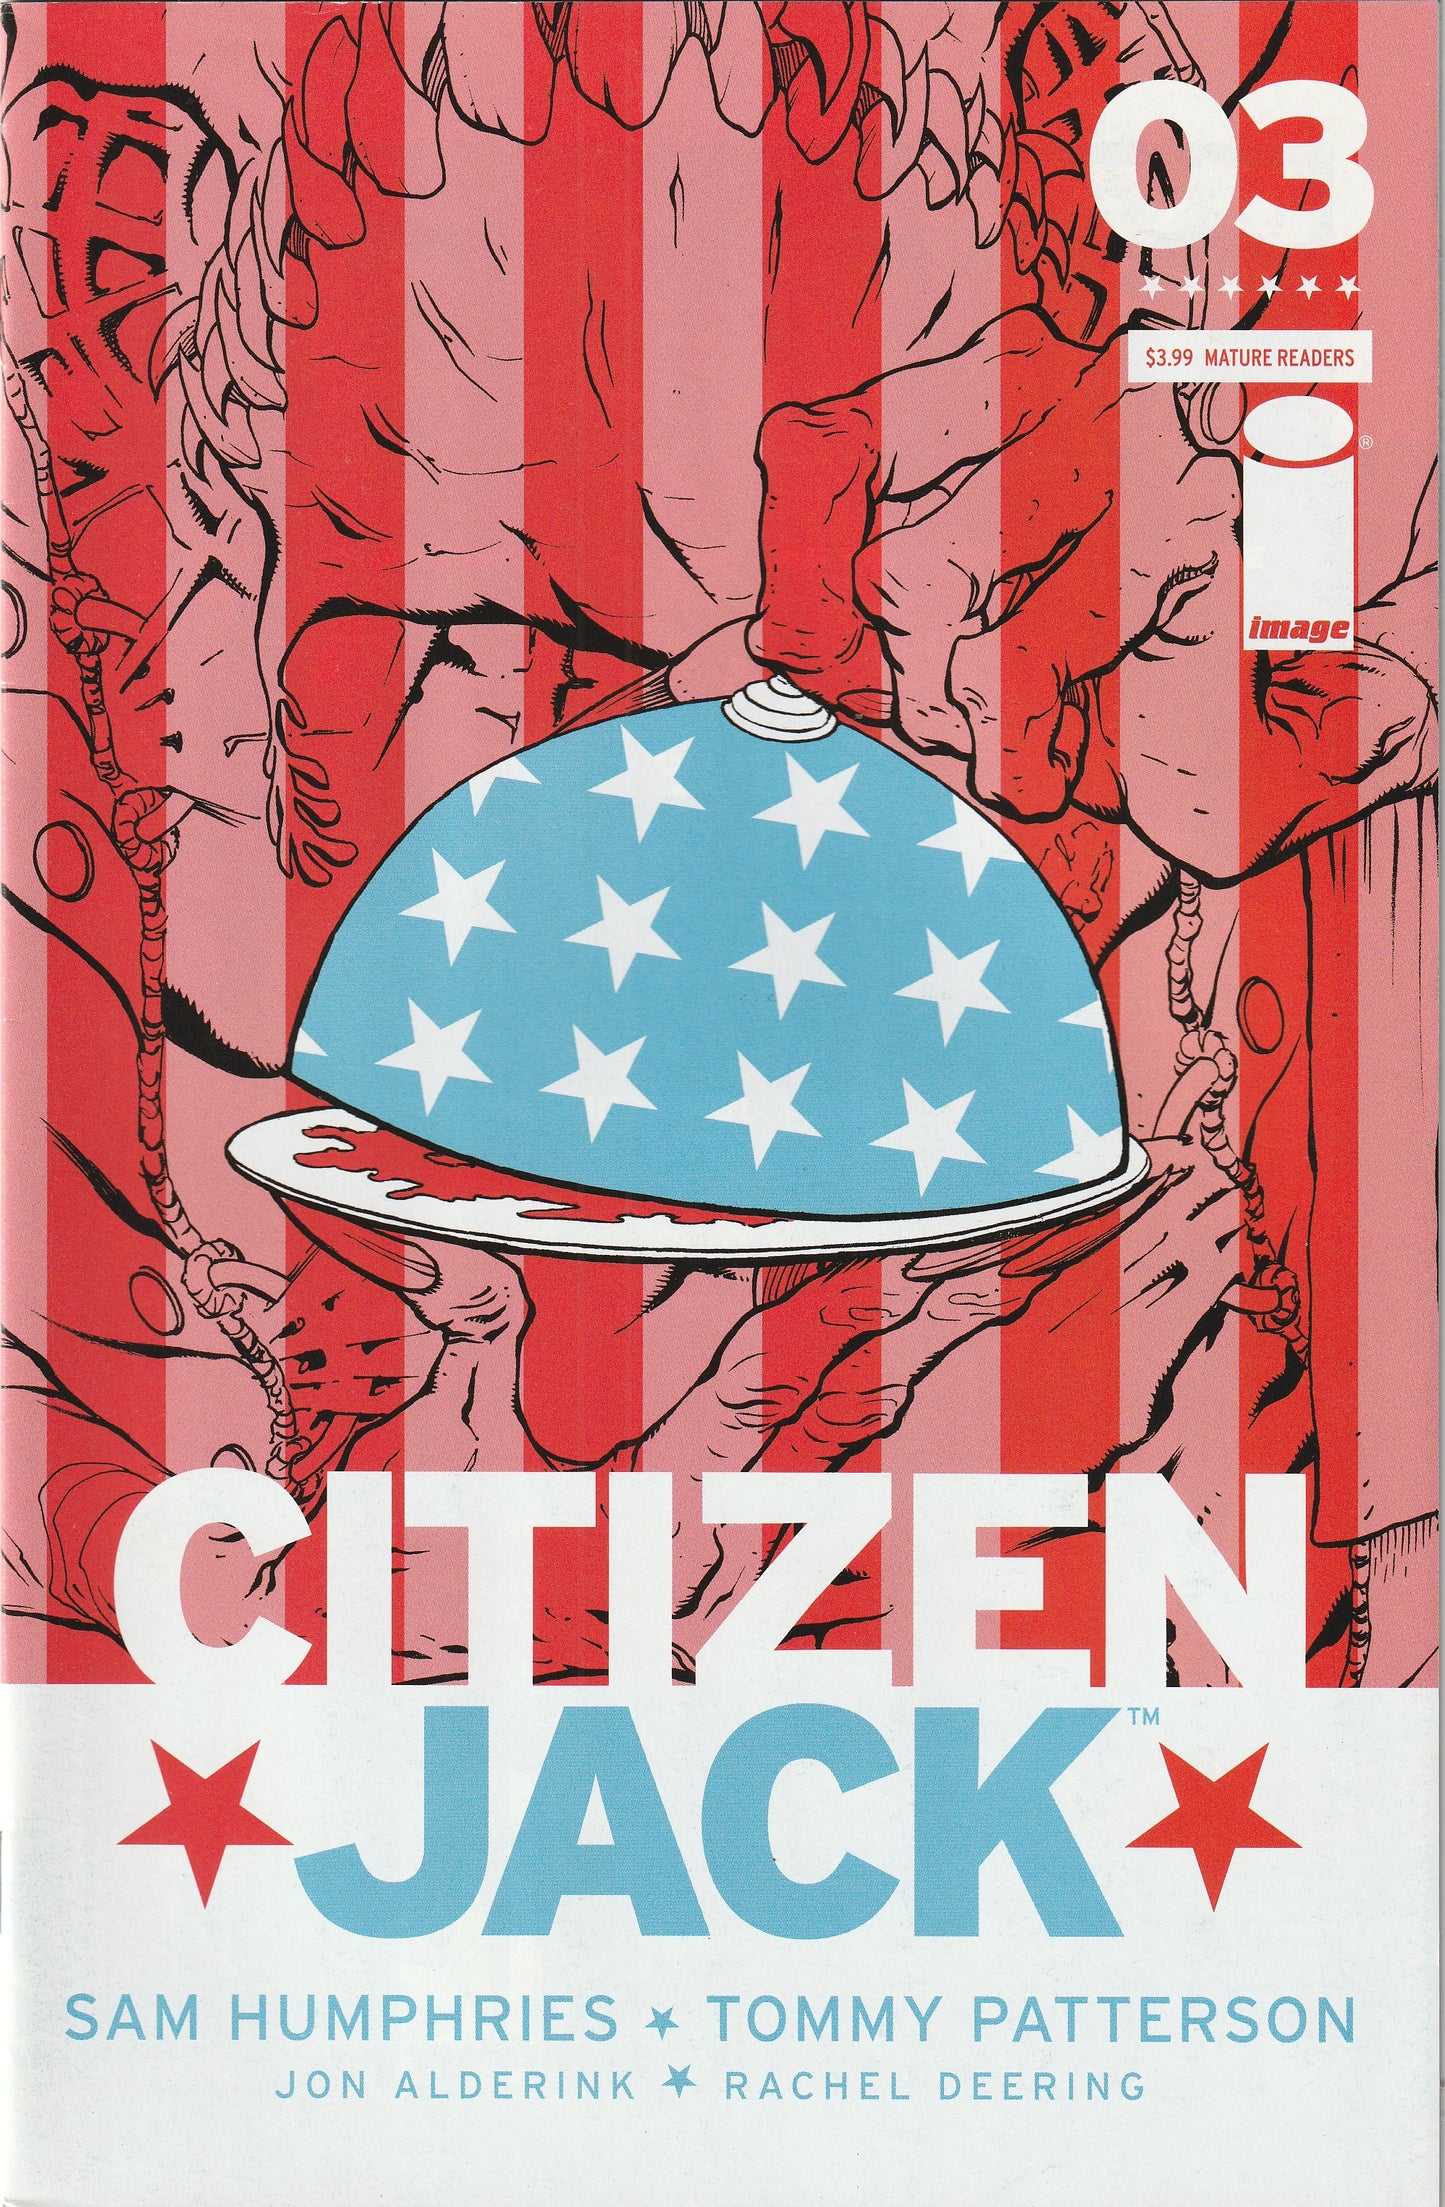 Citizen Jack #3 (2016) - Cover A by Tommy Patterson & Dylan Todd